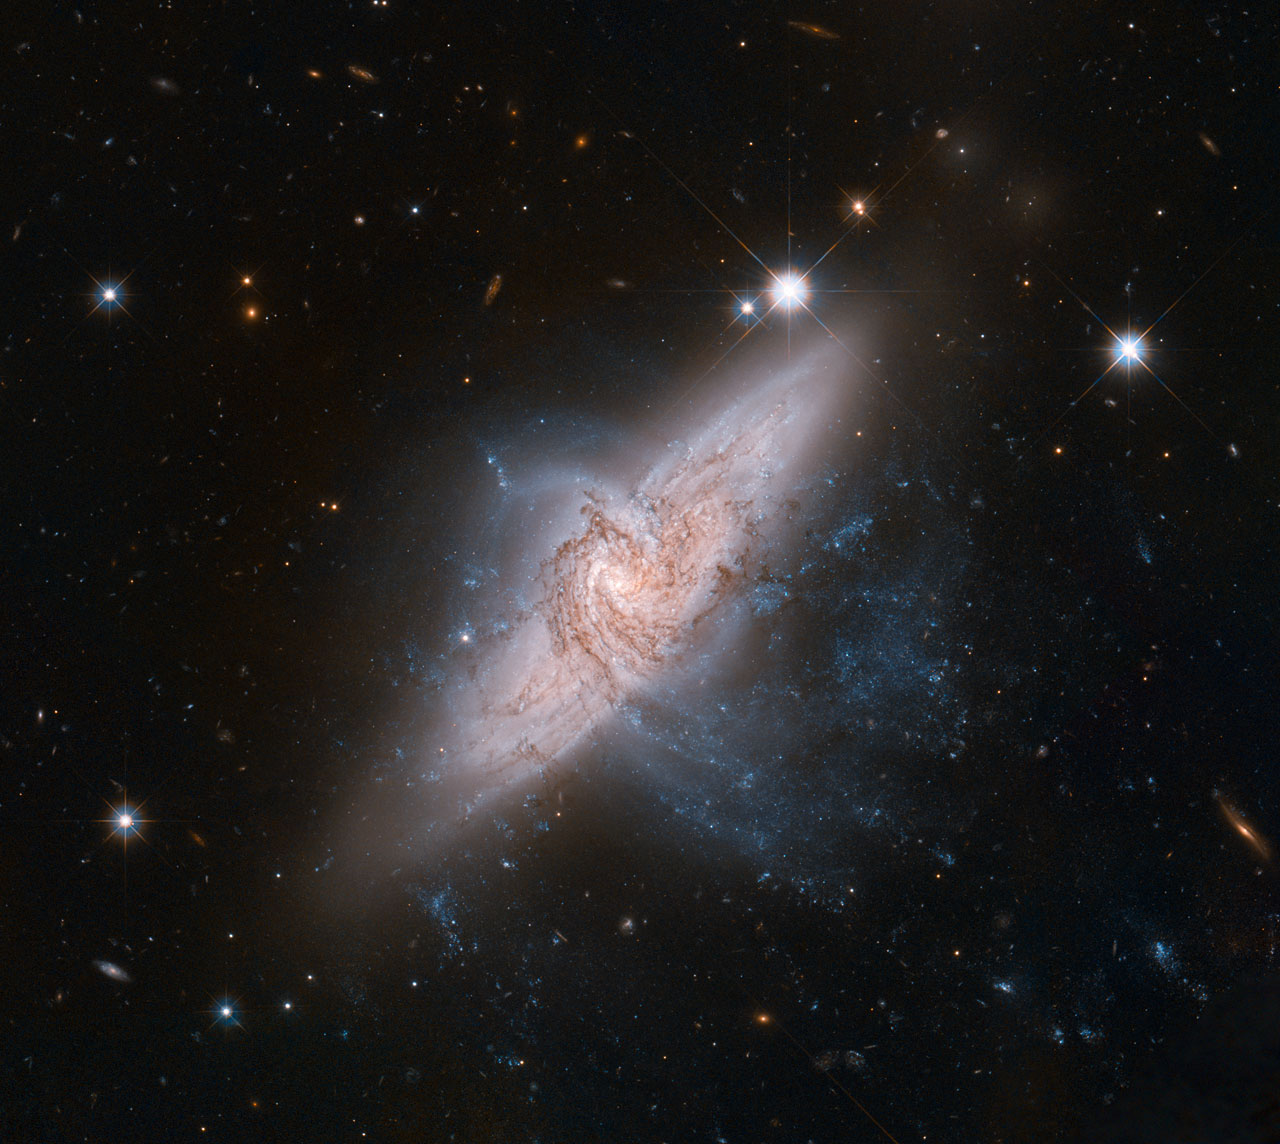 The NASA/ESA Hubble Space Telescope has produced an incredibly detailed image of a pair of overlapping galaxies called NGC 3314. While the two galaxies look as if they are in the midst of a collision, this is in fact a trick of perspective: the two are in chance alignment from our vantage point.